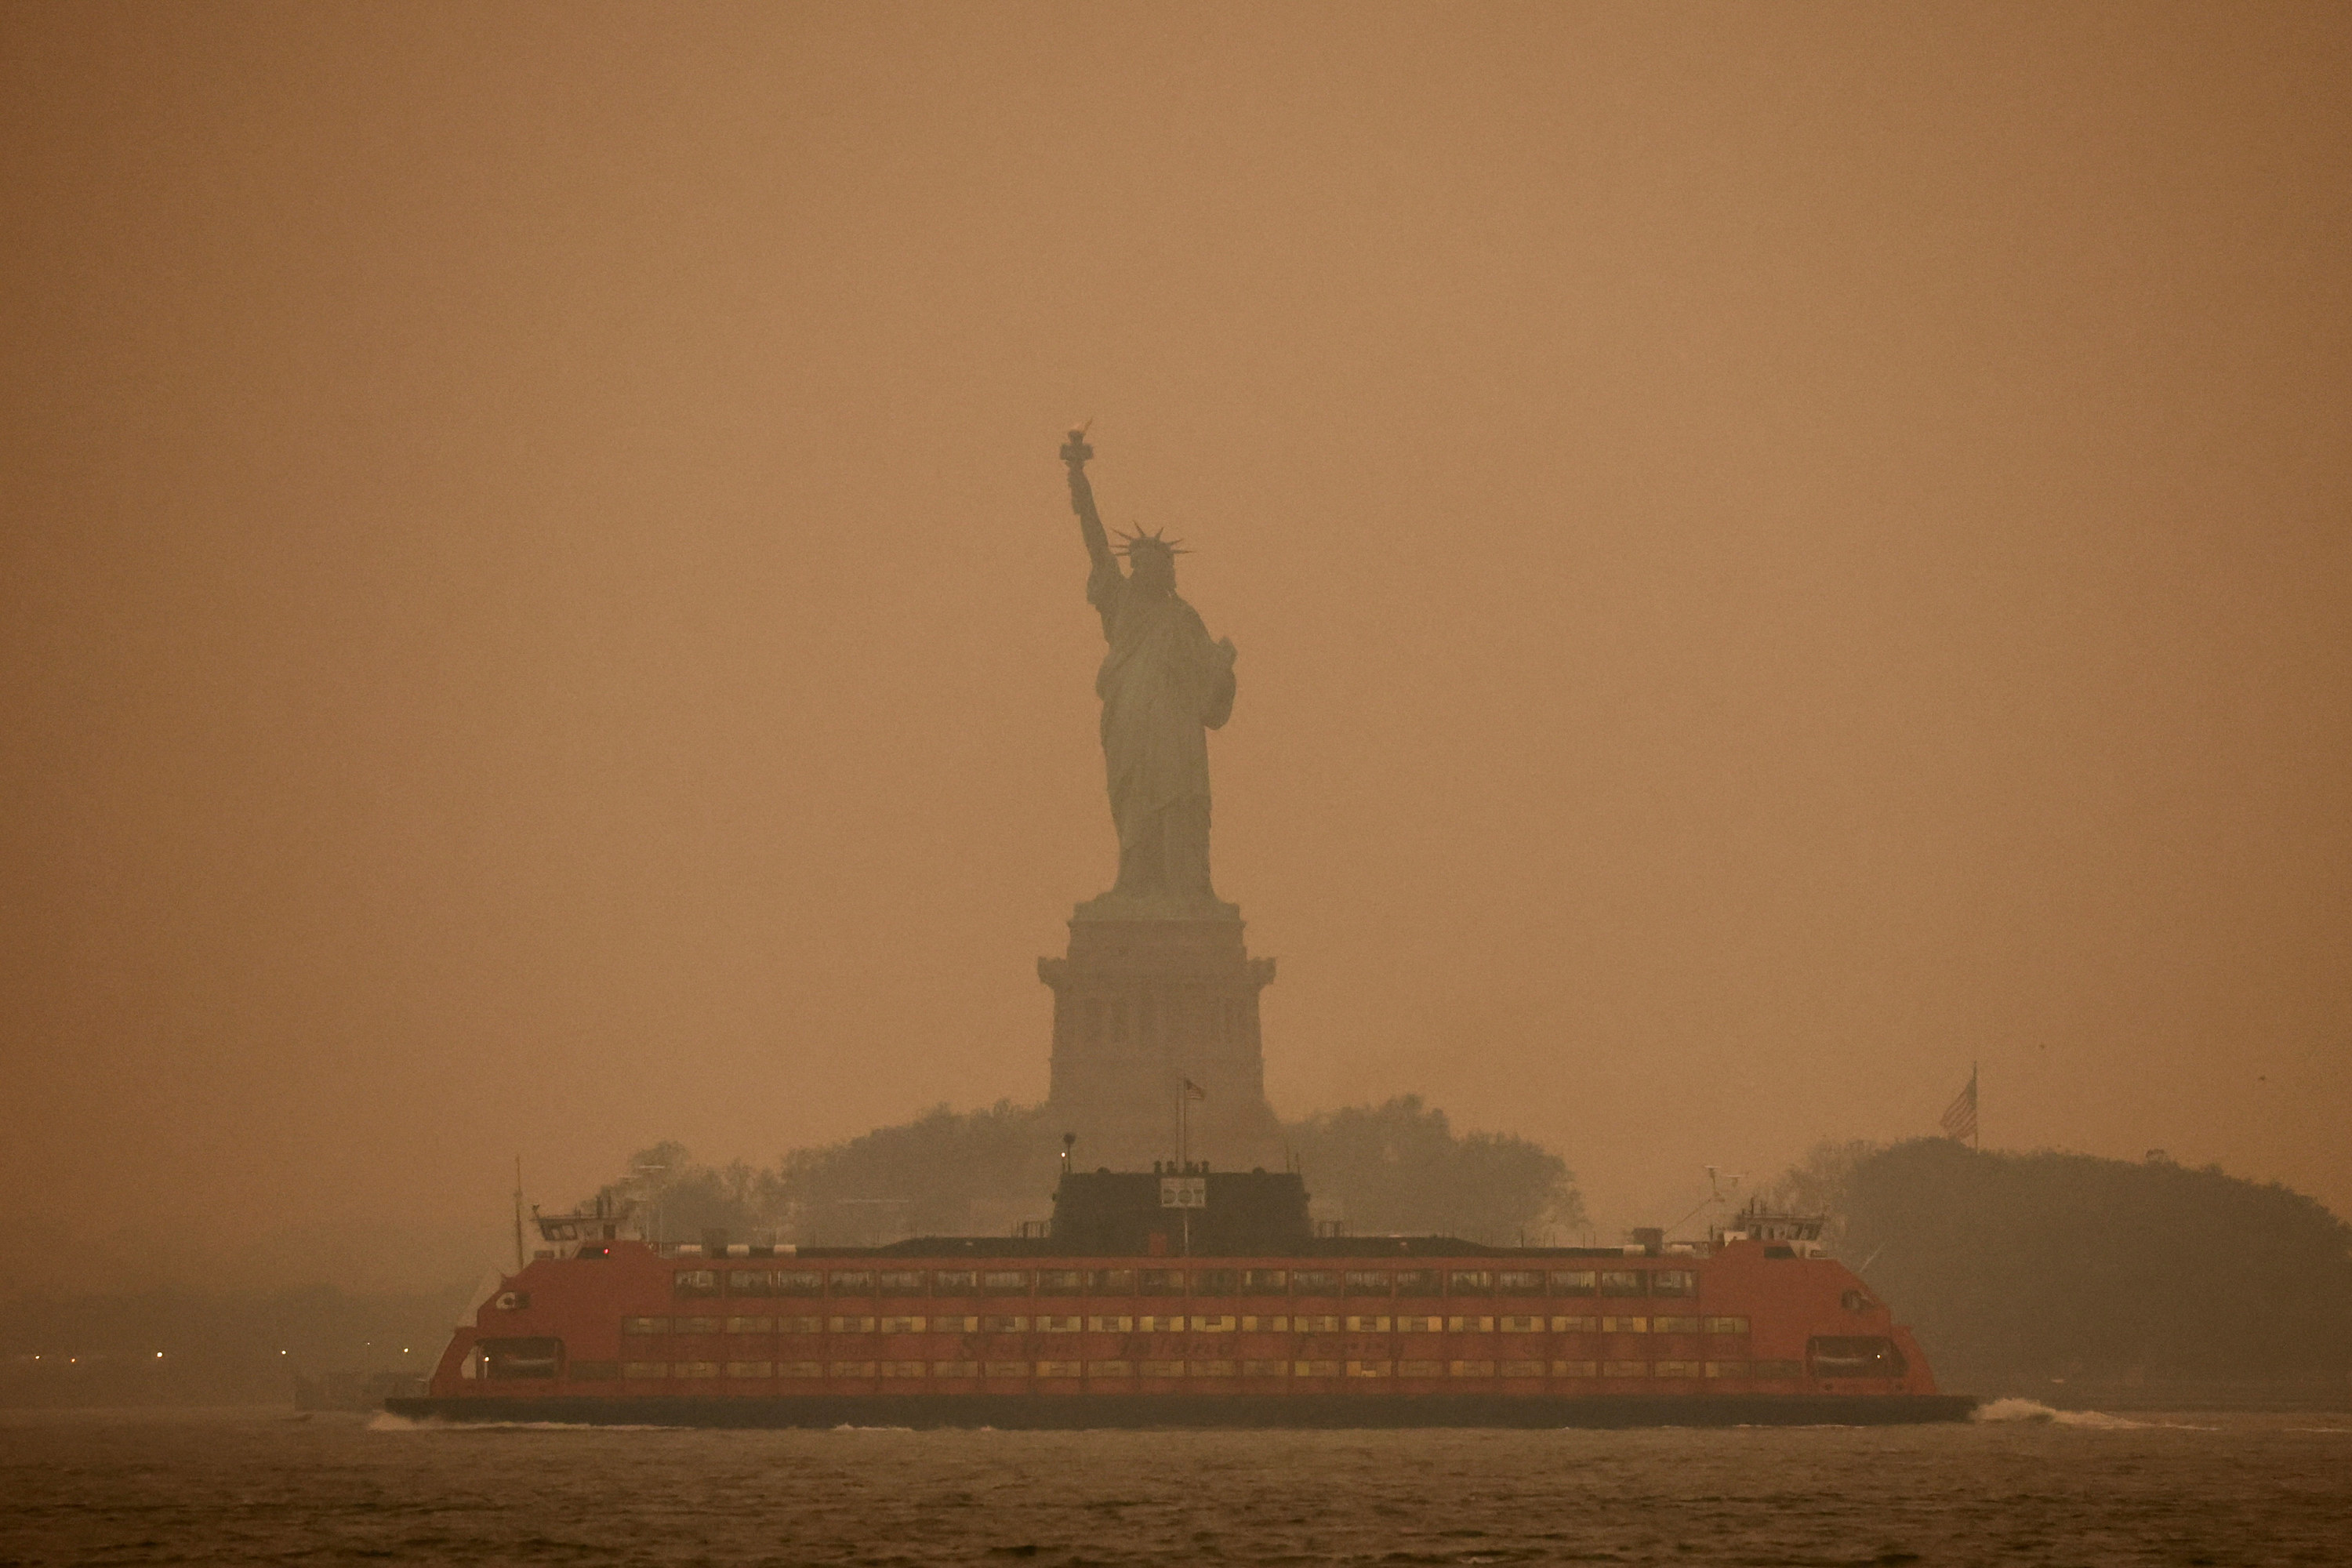 The Statue of Liberty covered in haze